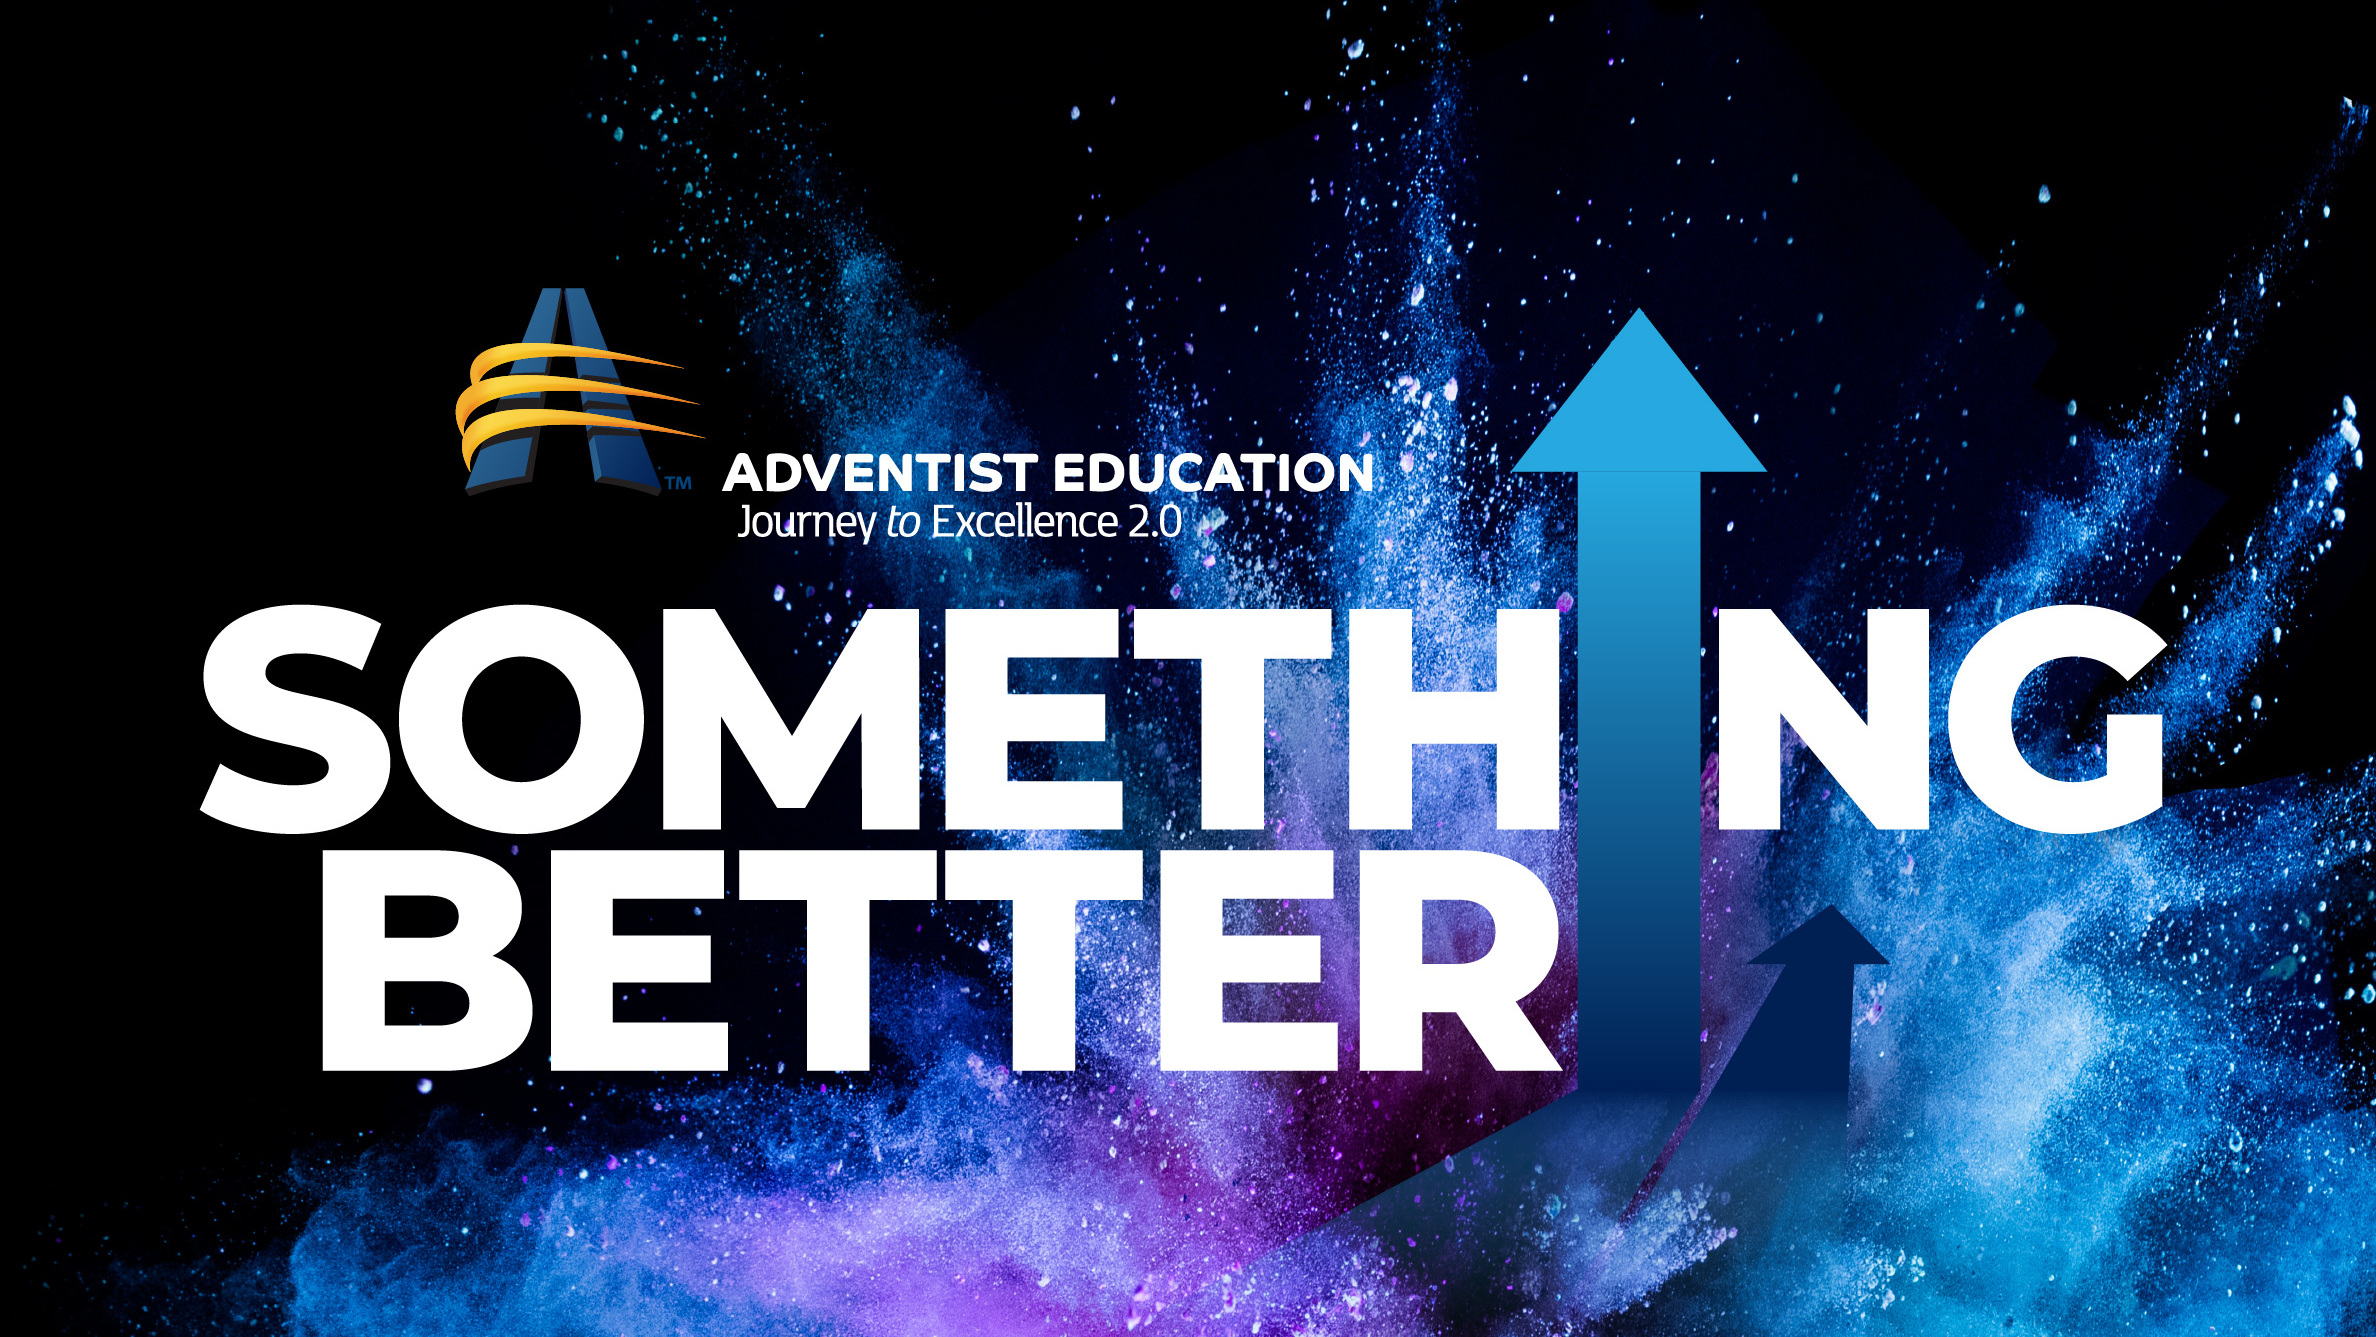 Convention to Inspire 6,000 Educators to Strive for “Something Better